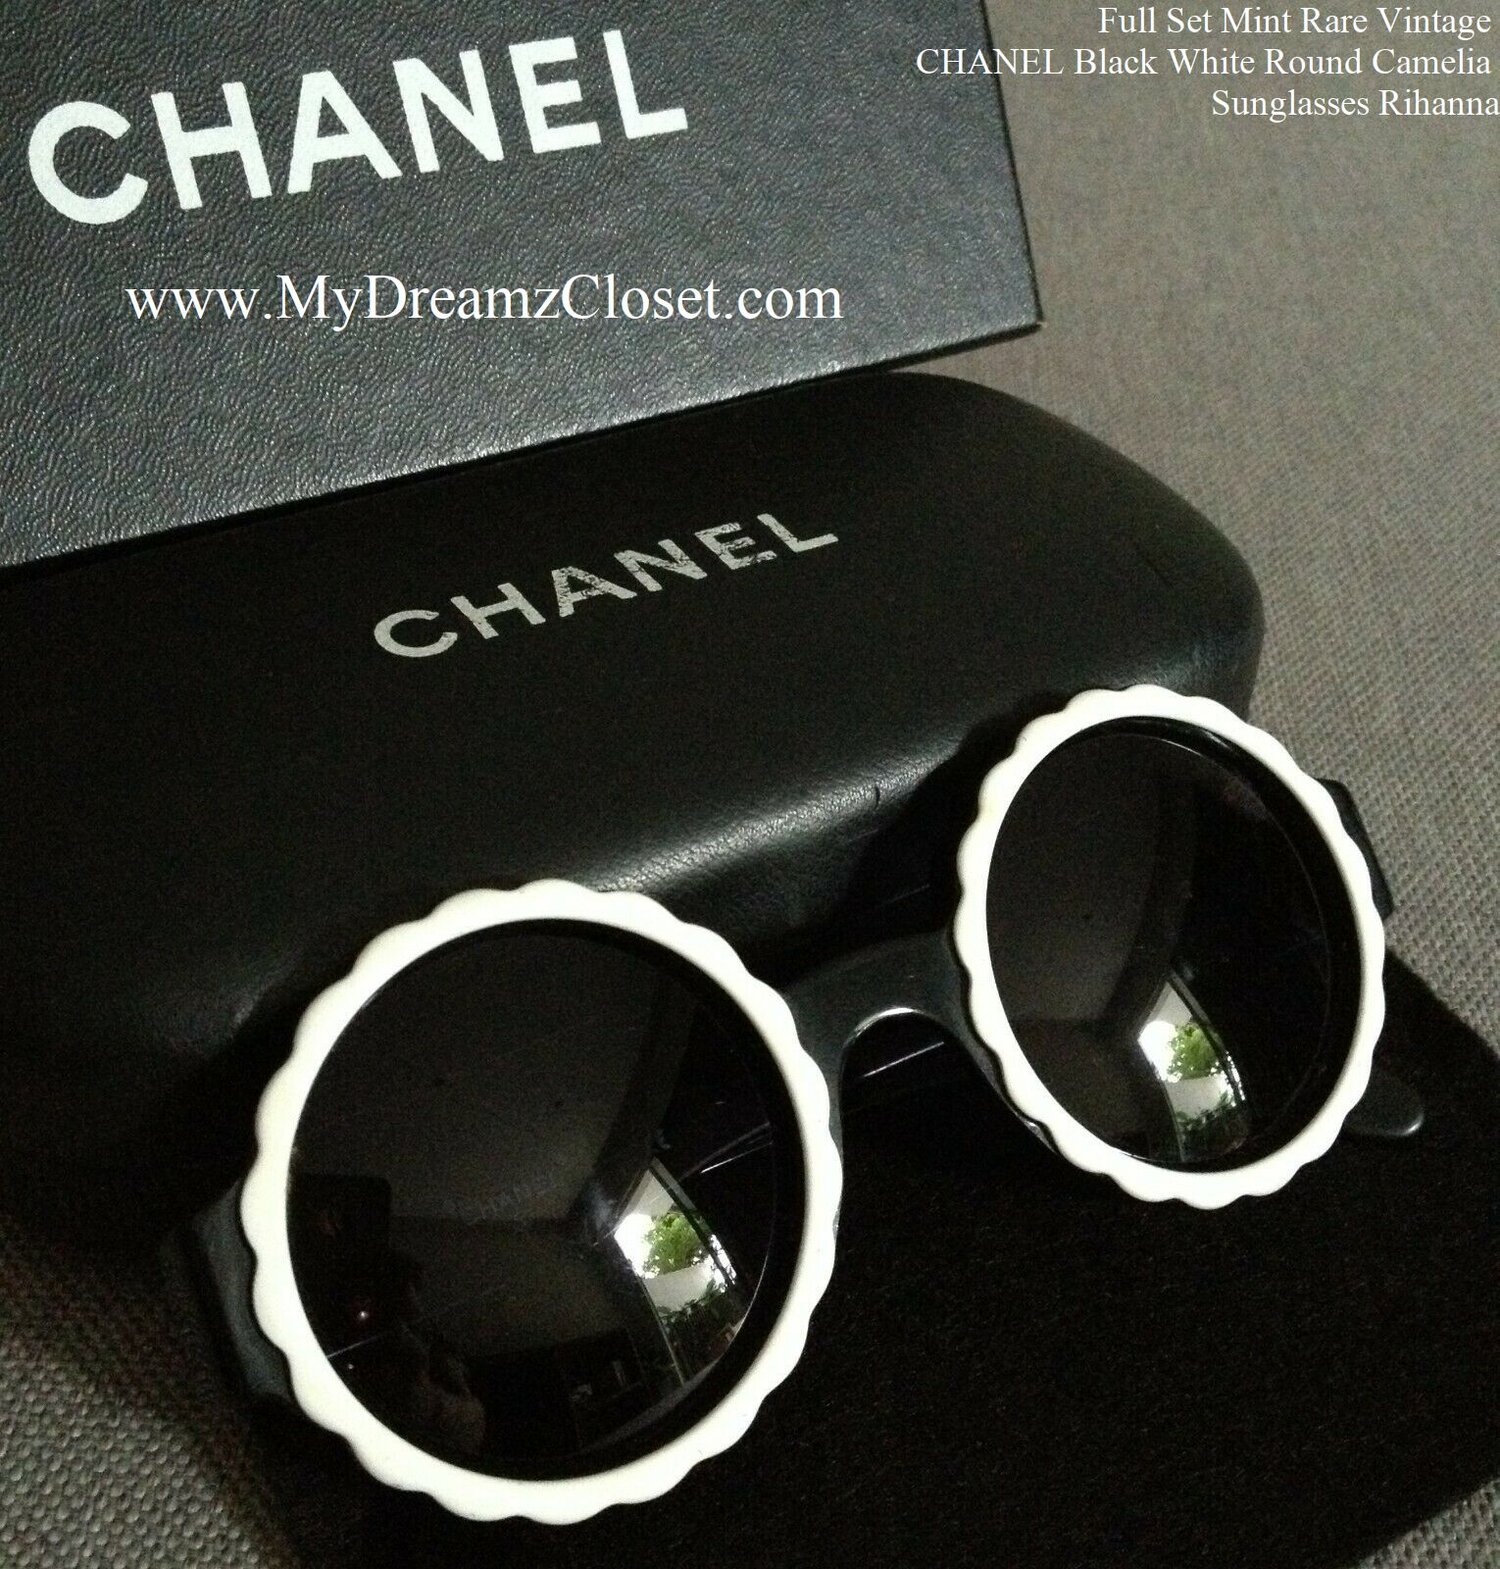 Vintage CHANEL black round frame mod sunglasses with white CHANEL